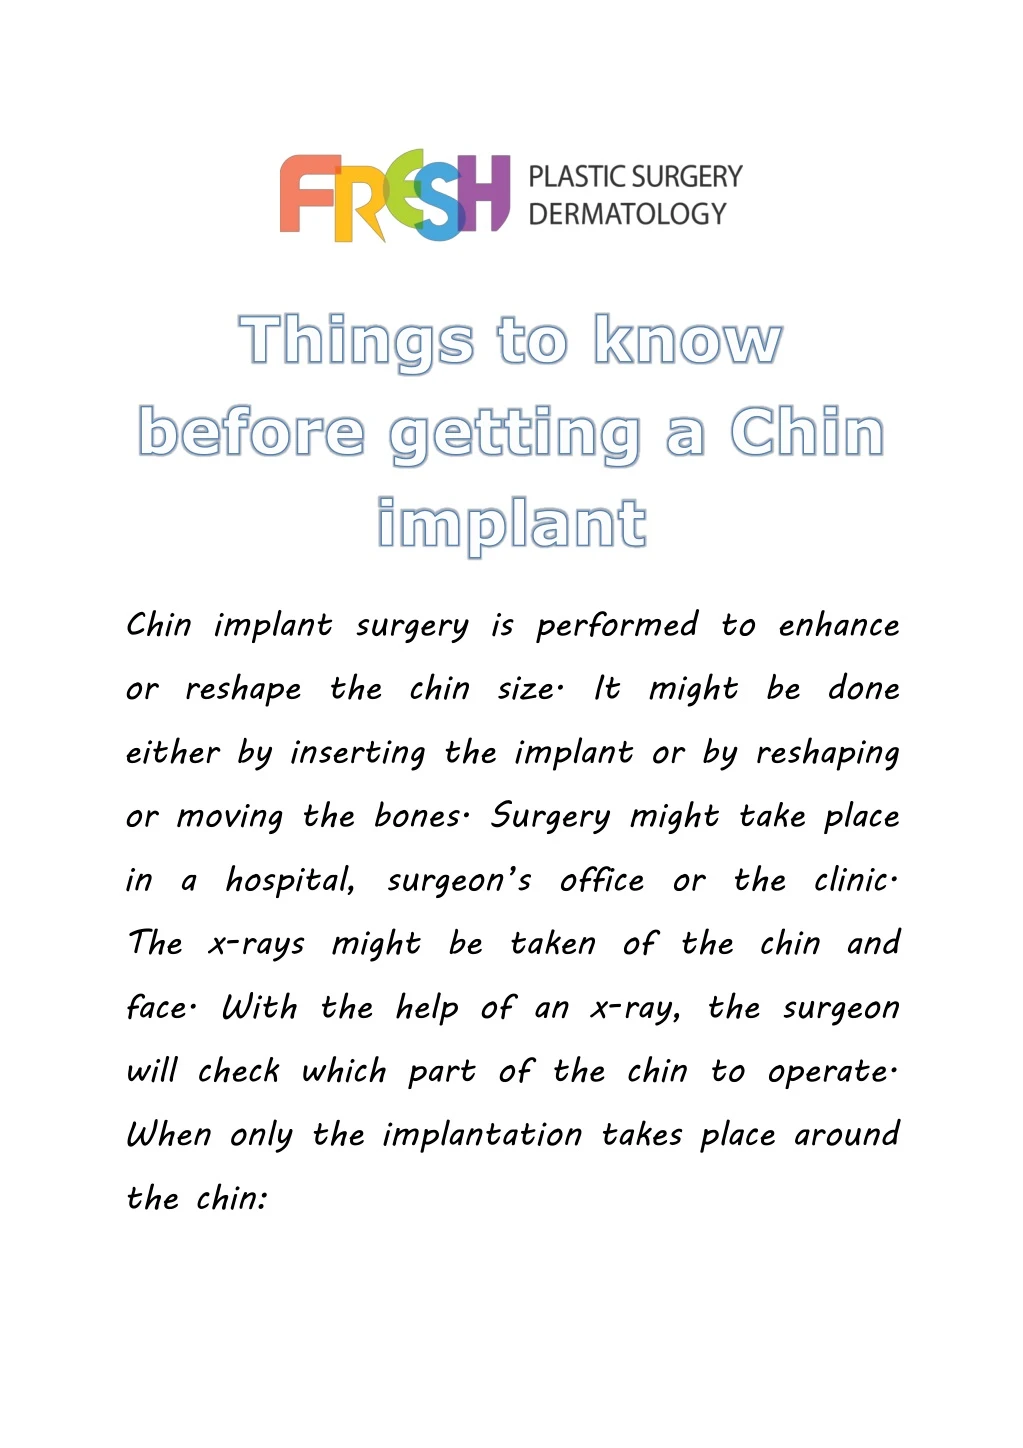 chin implant surgery is performed to enhance